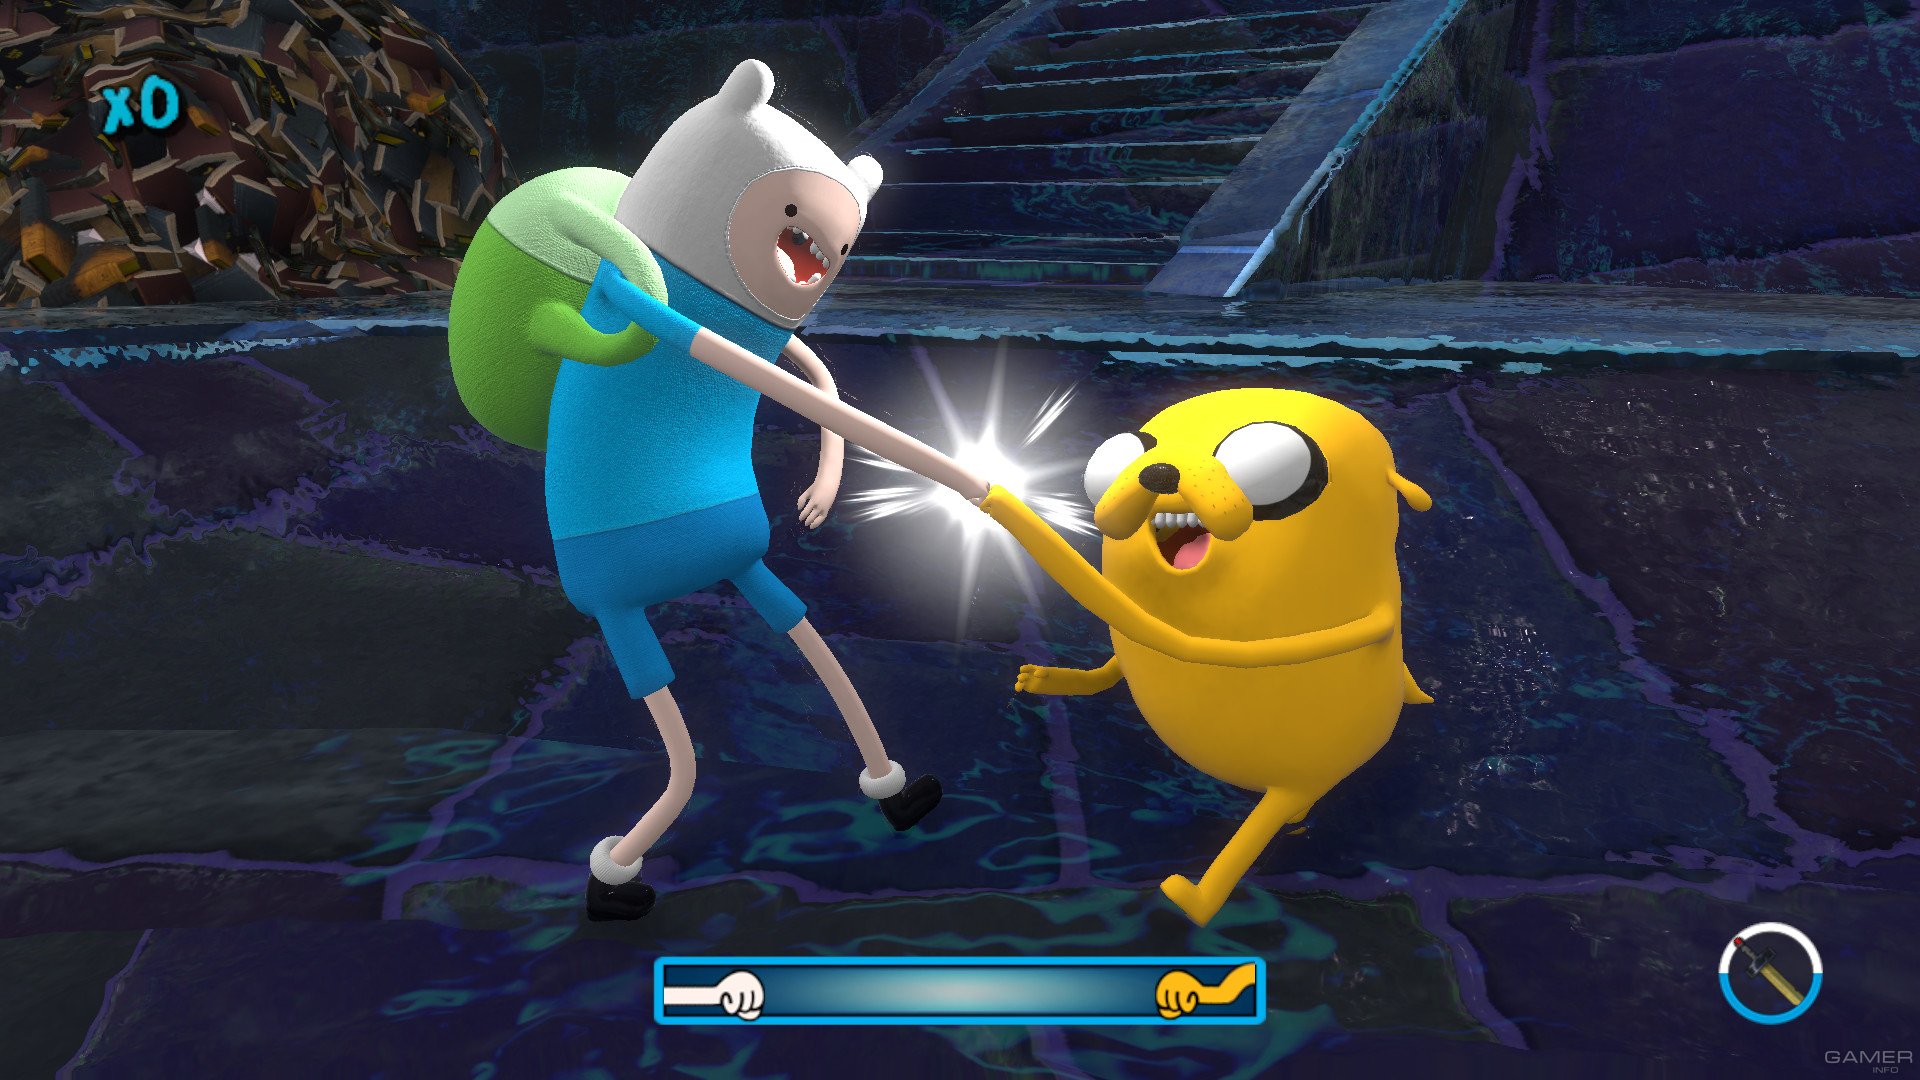 Adventure Time: Finn and Jake Investigations (2015 video game)